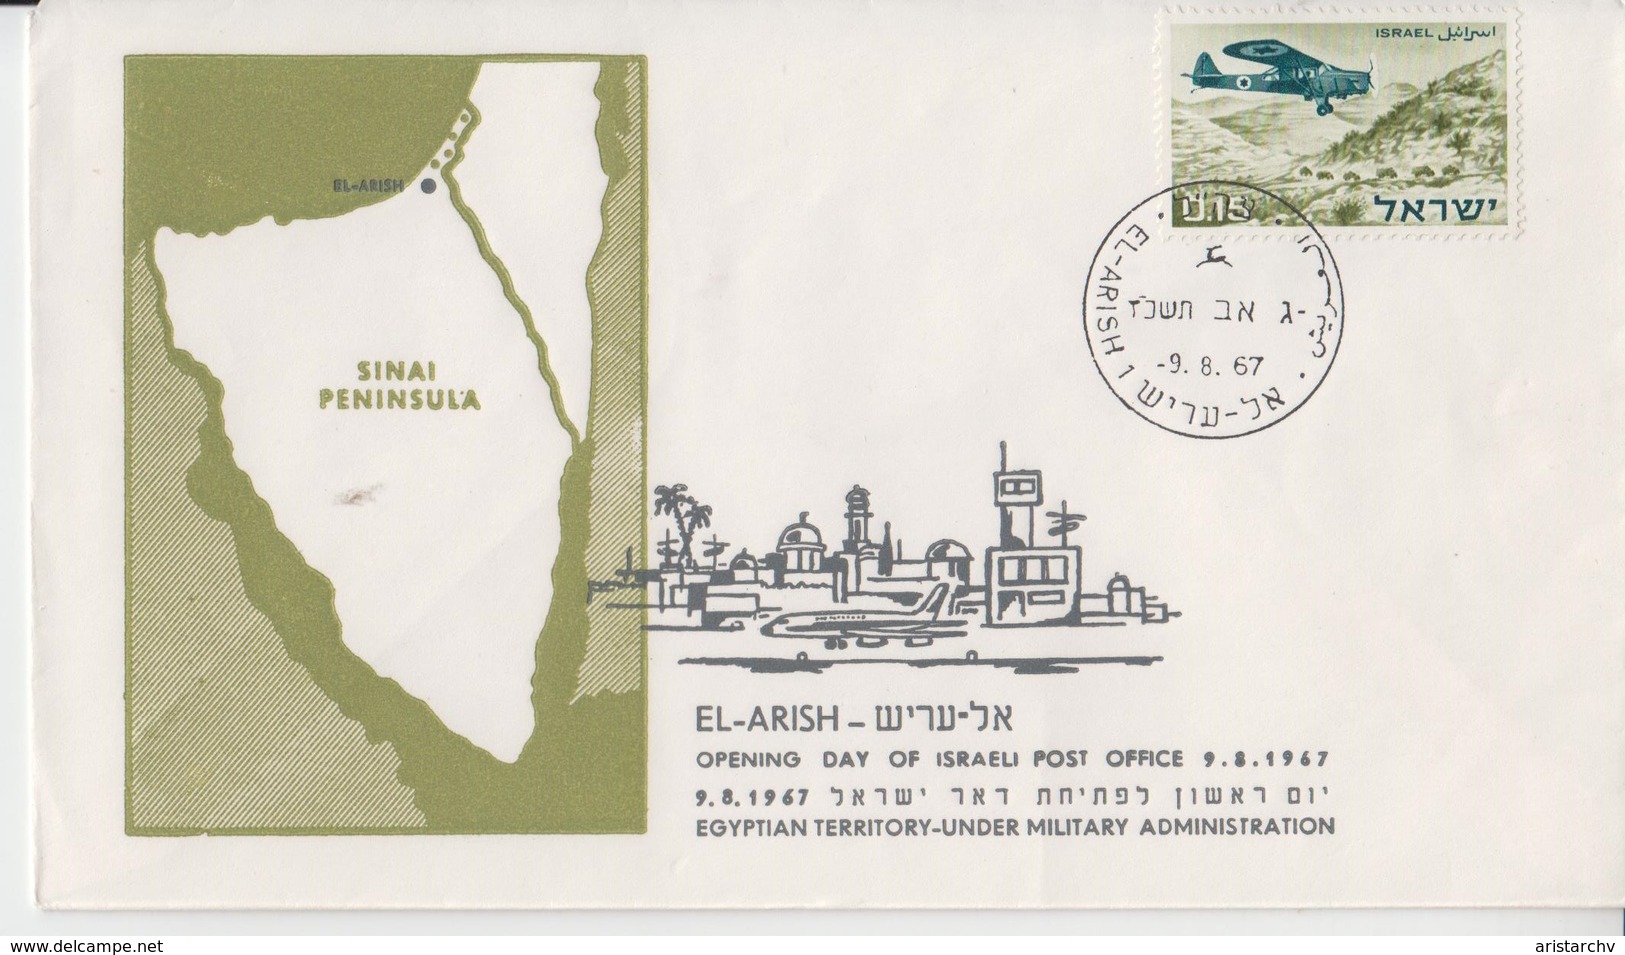 ISRAEL 1967 EL ARISH SINAI PENINSULA OPENING DAY POST OFFICE EGYPTIAN TERRITORY MILITARY ADMINISTRATION TZAHAL IDF COVER - Postage Due